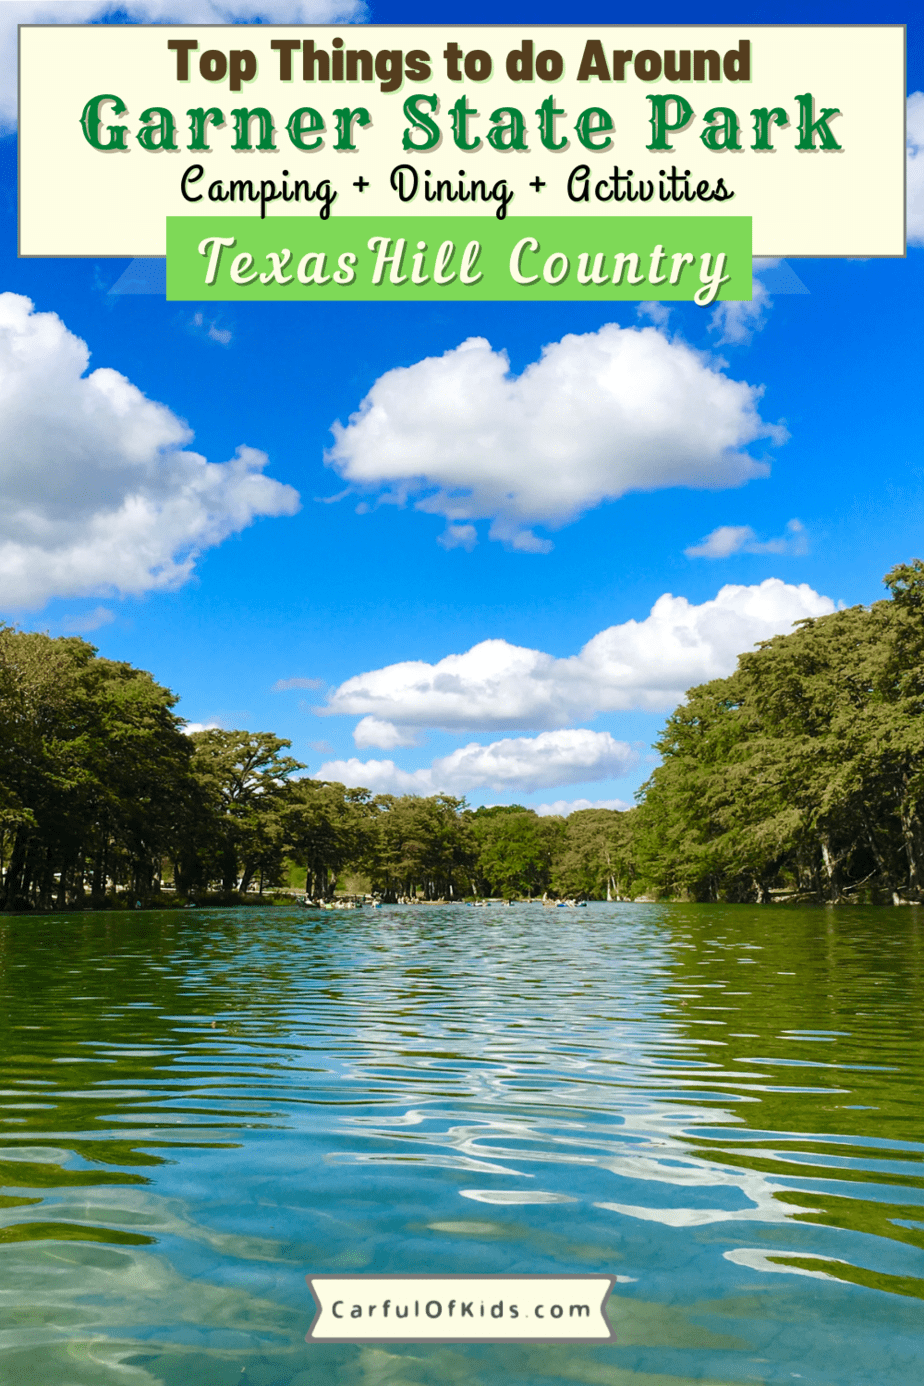 Located in the western edge of the Texas Hill Country, Garner State Park is an iconic state park and the most popular state park in Texas. During your stay, enjoy the cool water of the Frio River or a hike up Old Baldy. Got all the details for Garner State Park along with neighboring Concan, like where to eat and where to stay along with live music and outdoor activities. Plan a trip to see why it's been a favorite for generatons. Most Popular State Park in Texas | Best of Texas | Top River Floats in Texas | Where to go in the Texas Hill Country #Garner #Texas